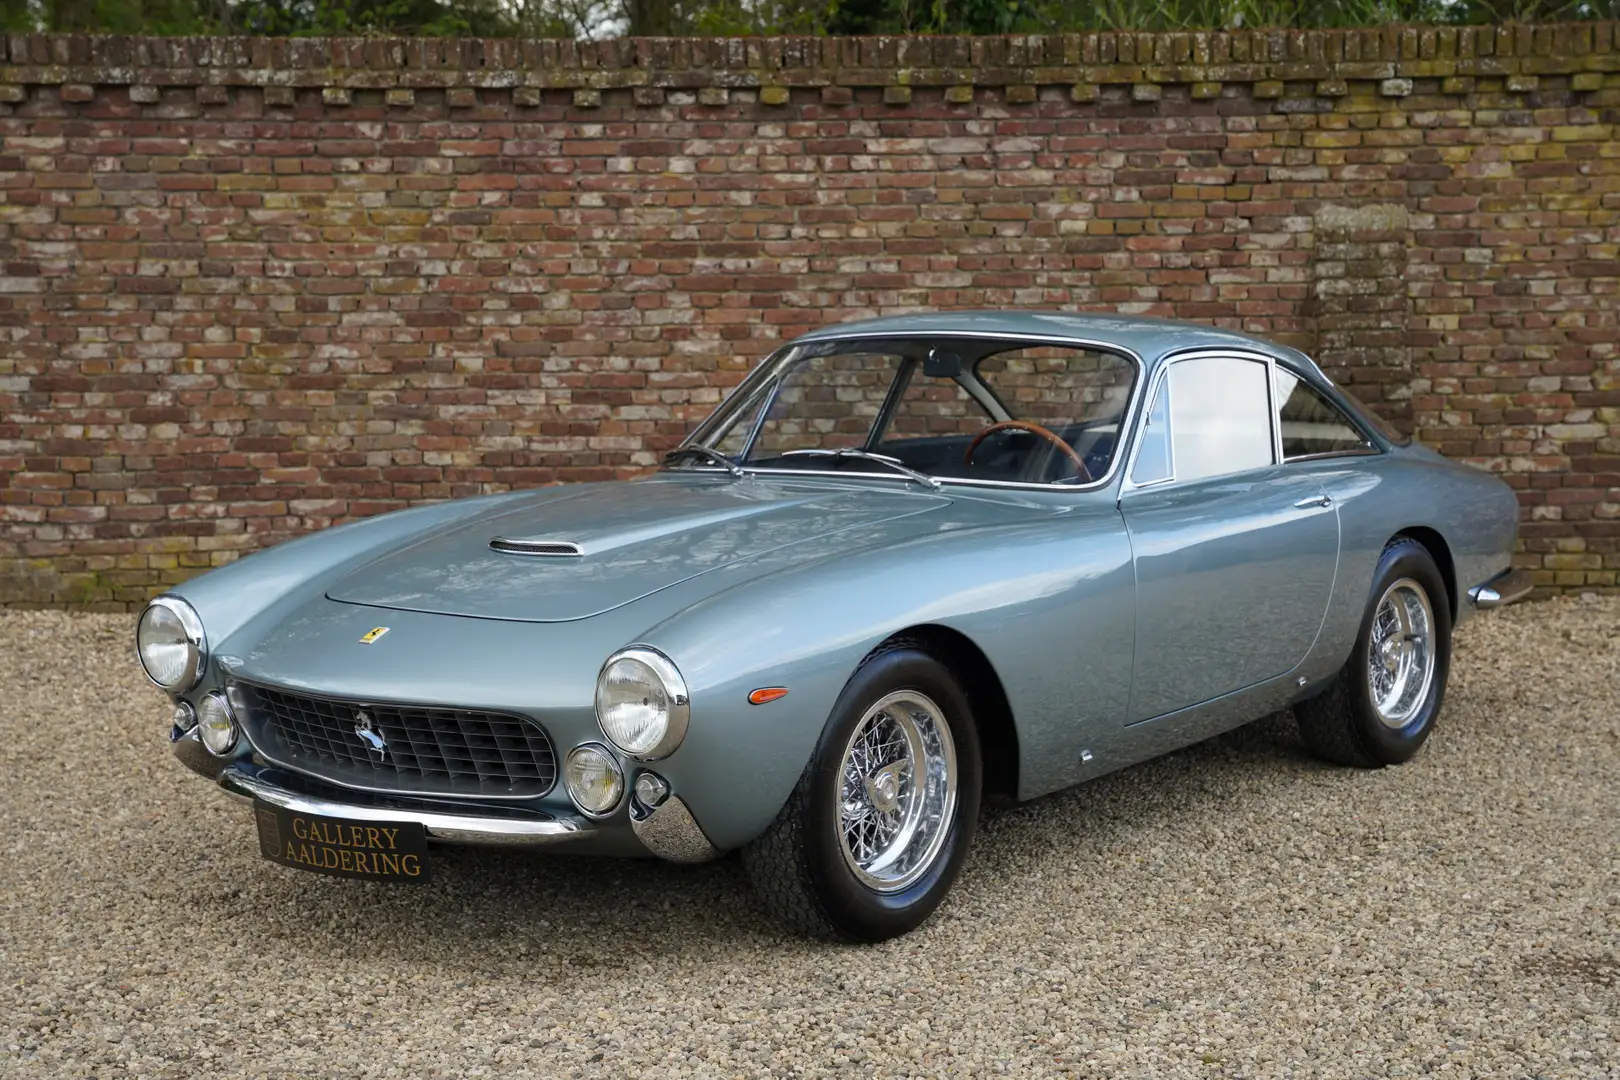 Ferrari 250 GT Lusso Excellent condition throughout, "Red Book Синій - 1